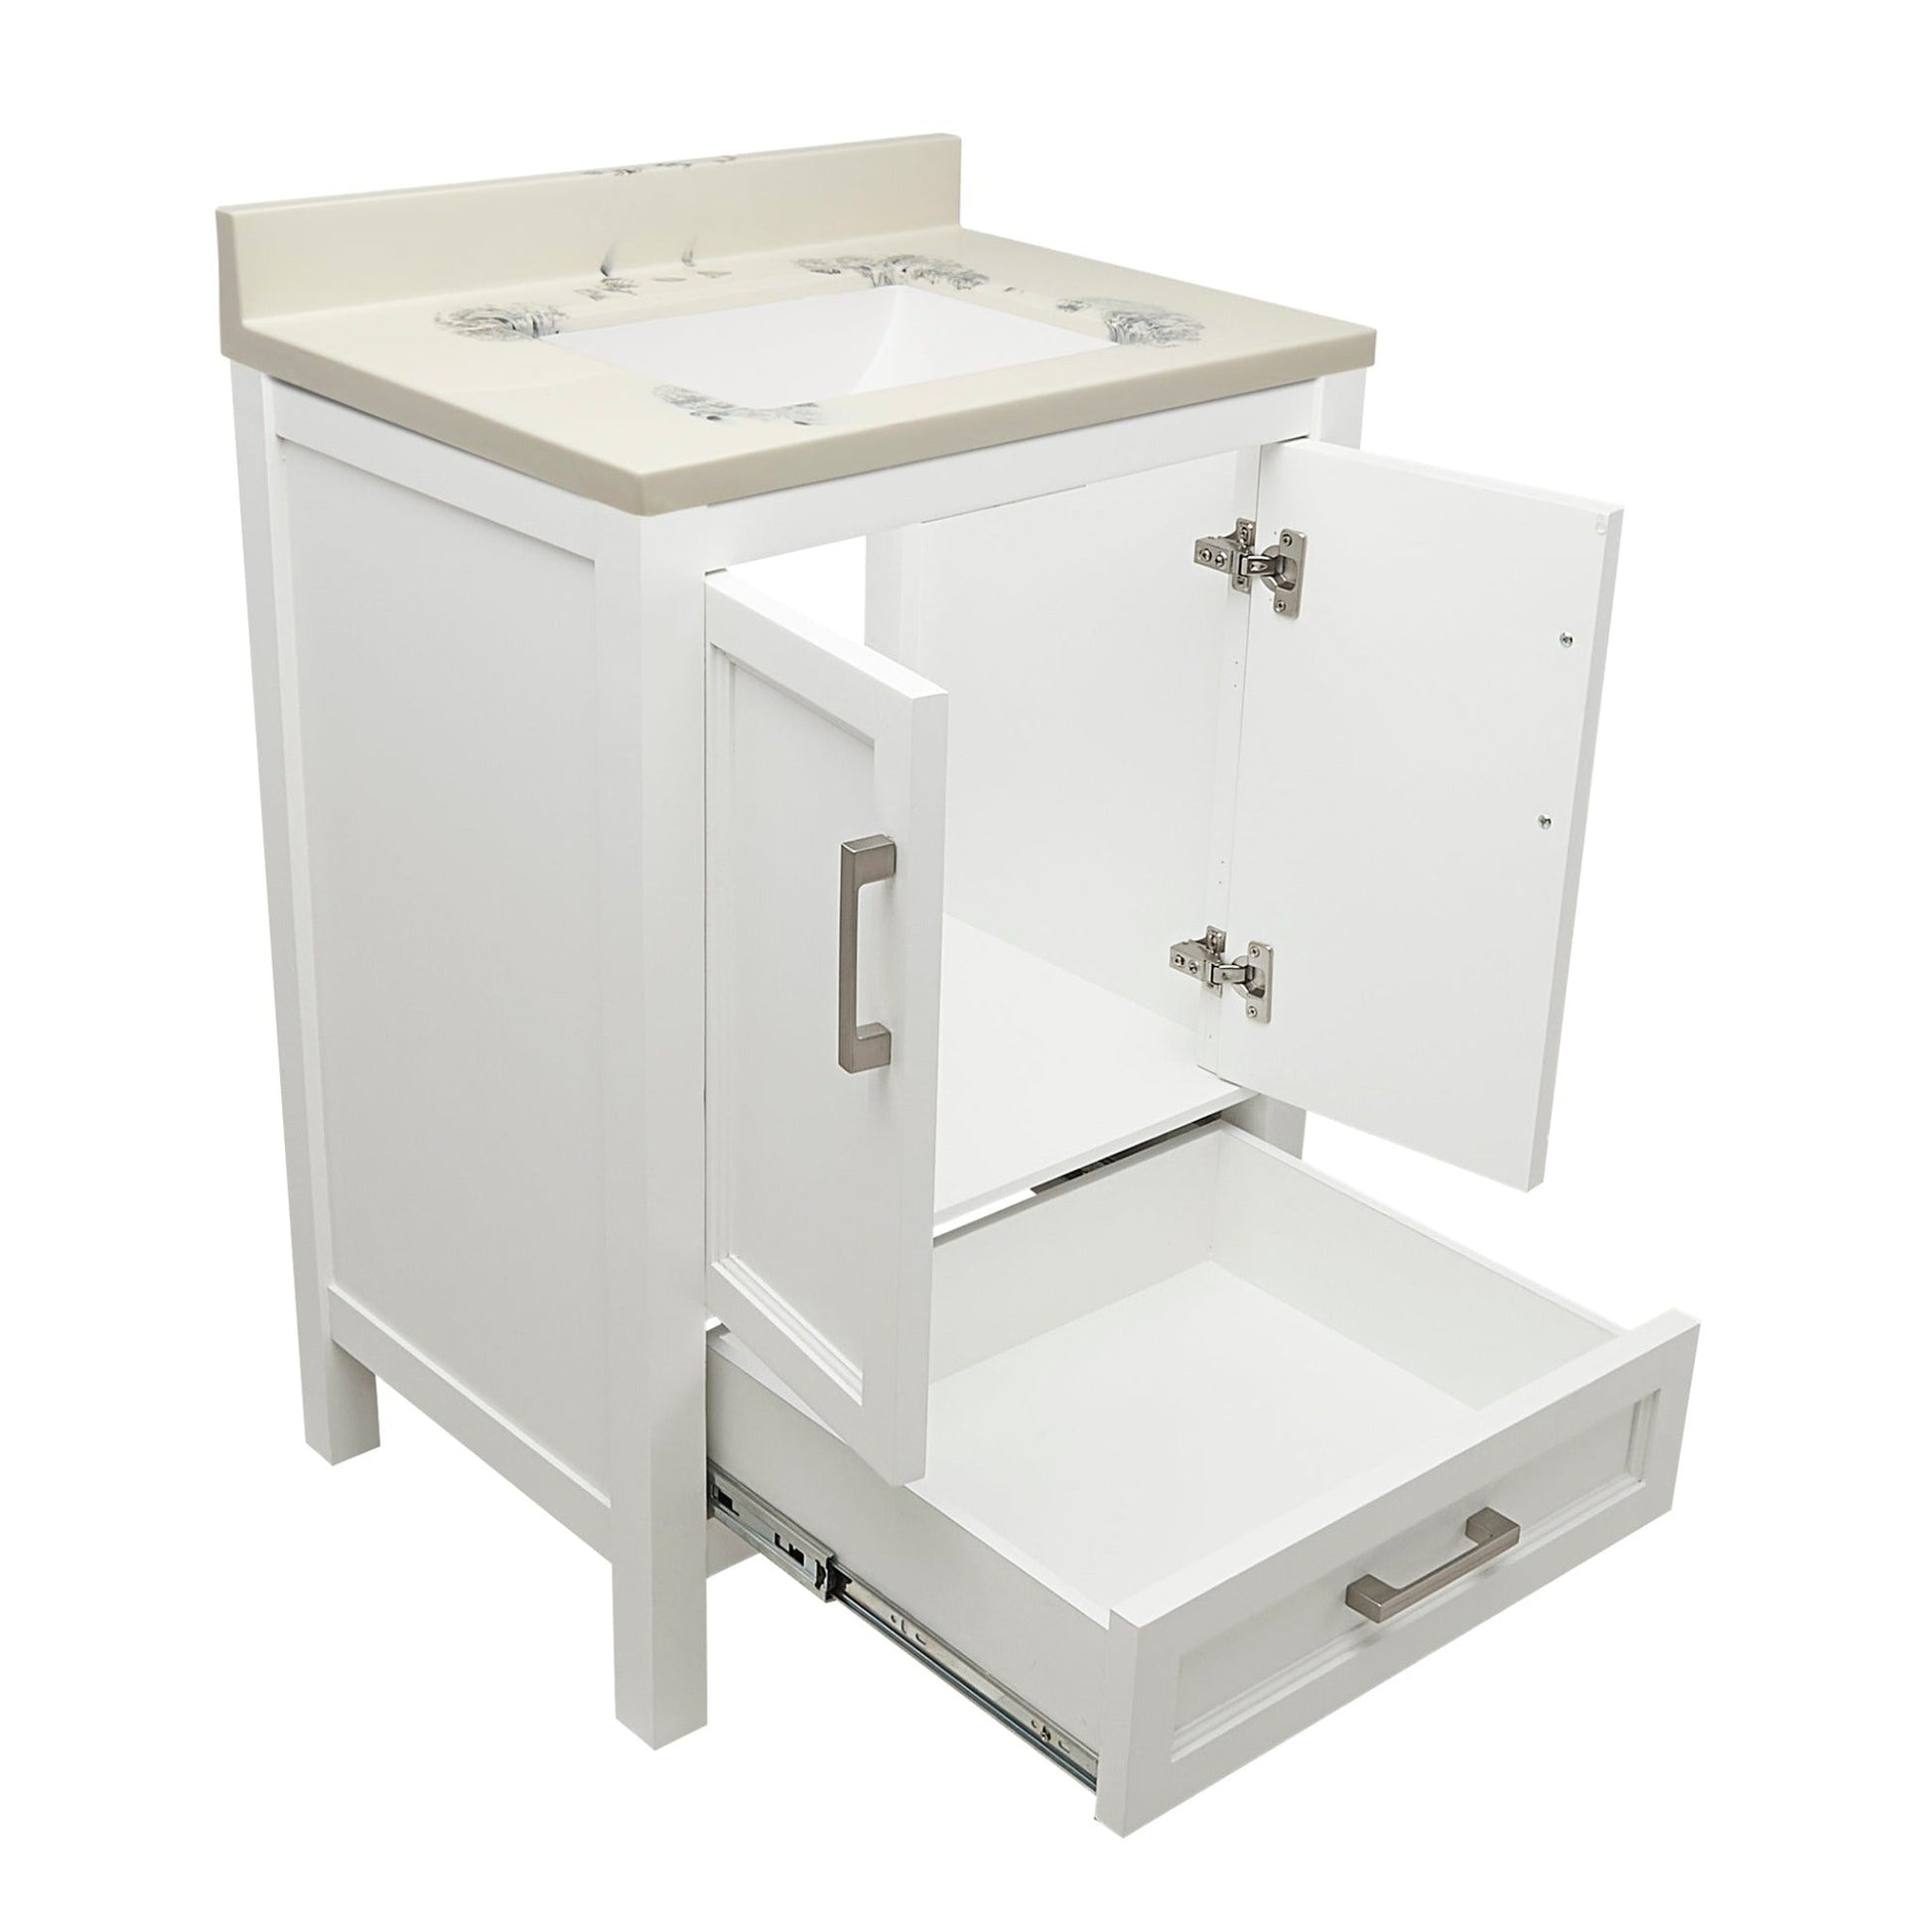 Ella’s Bubbles Nevado 25" White Bathroom Vanity With Carrara White Cultured Marble Top With Backsplash and Sink